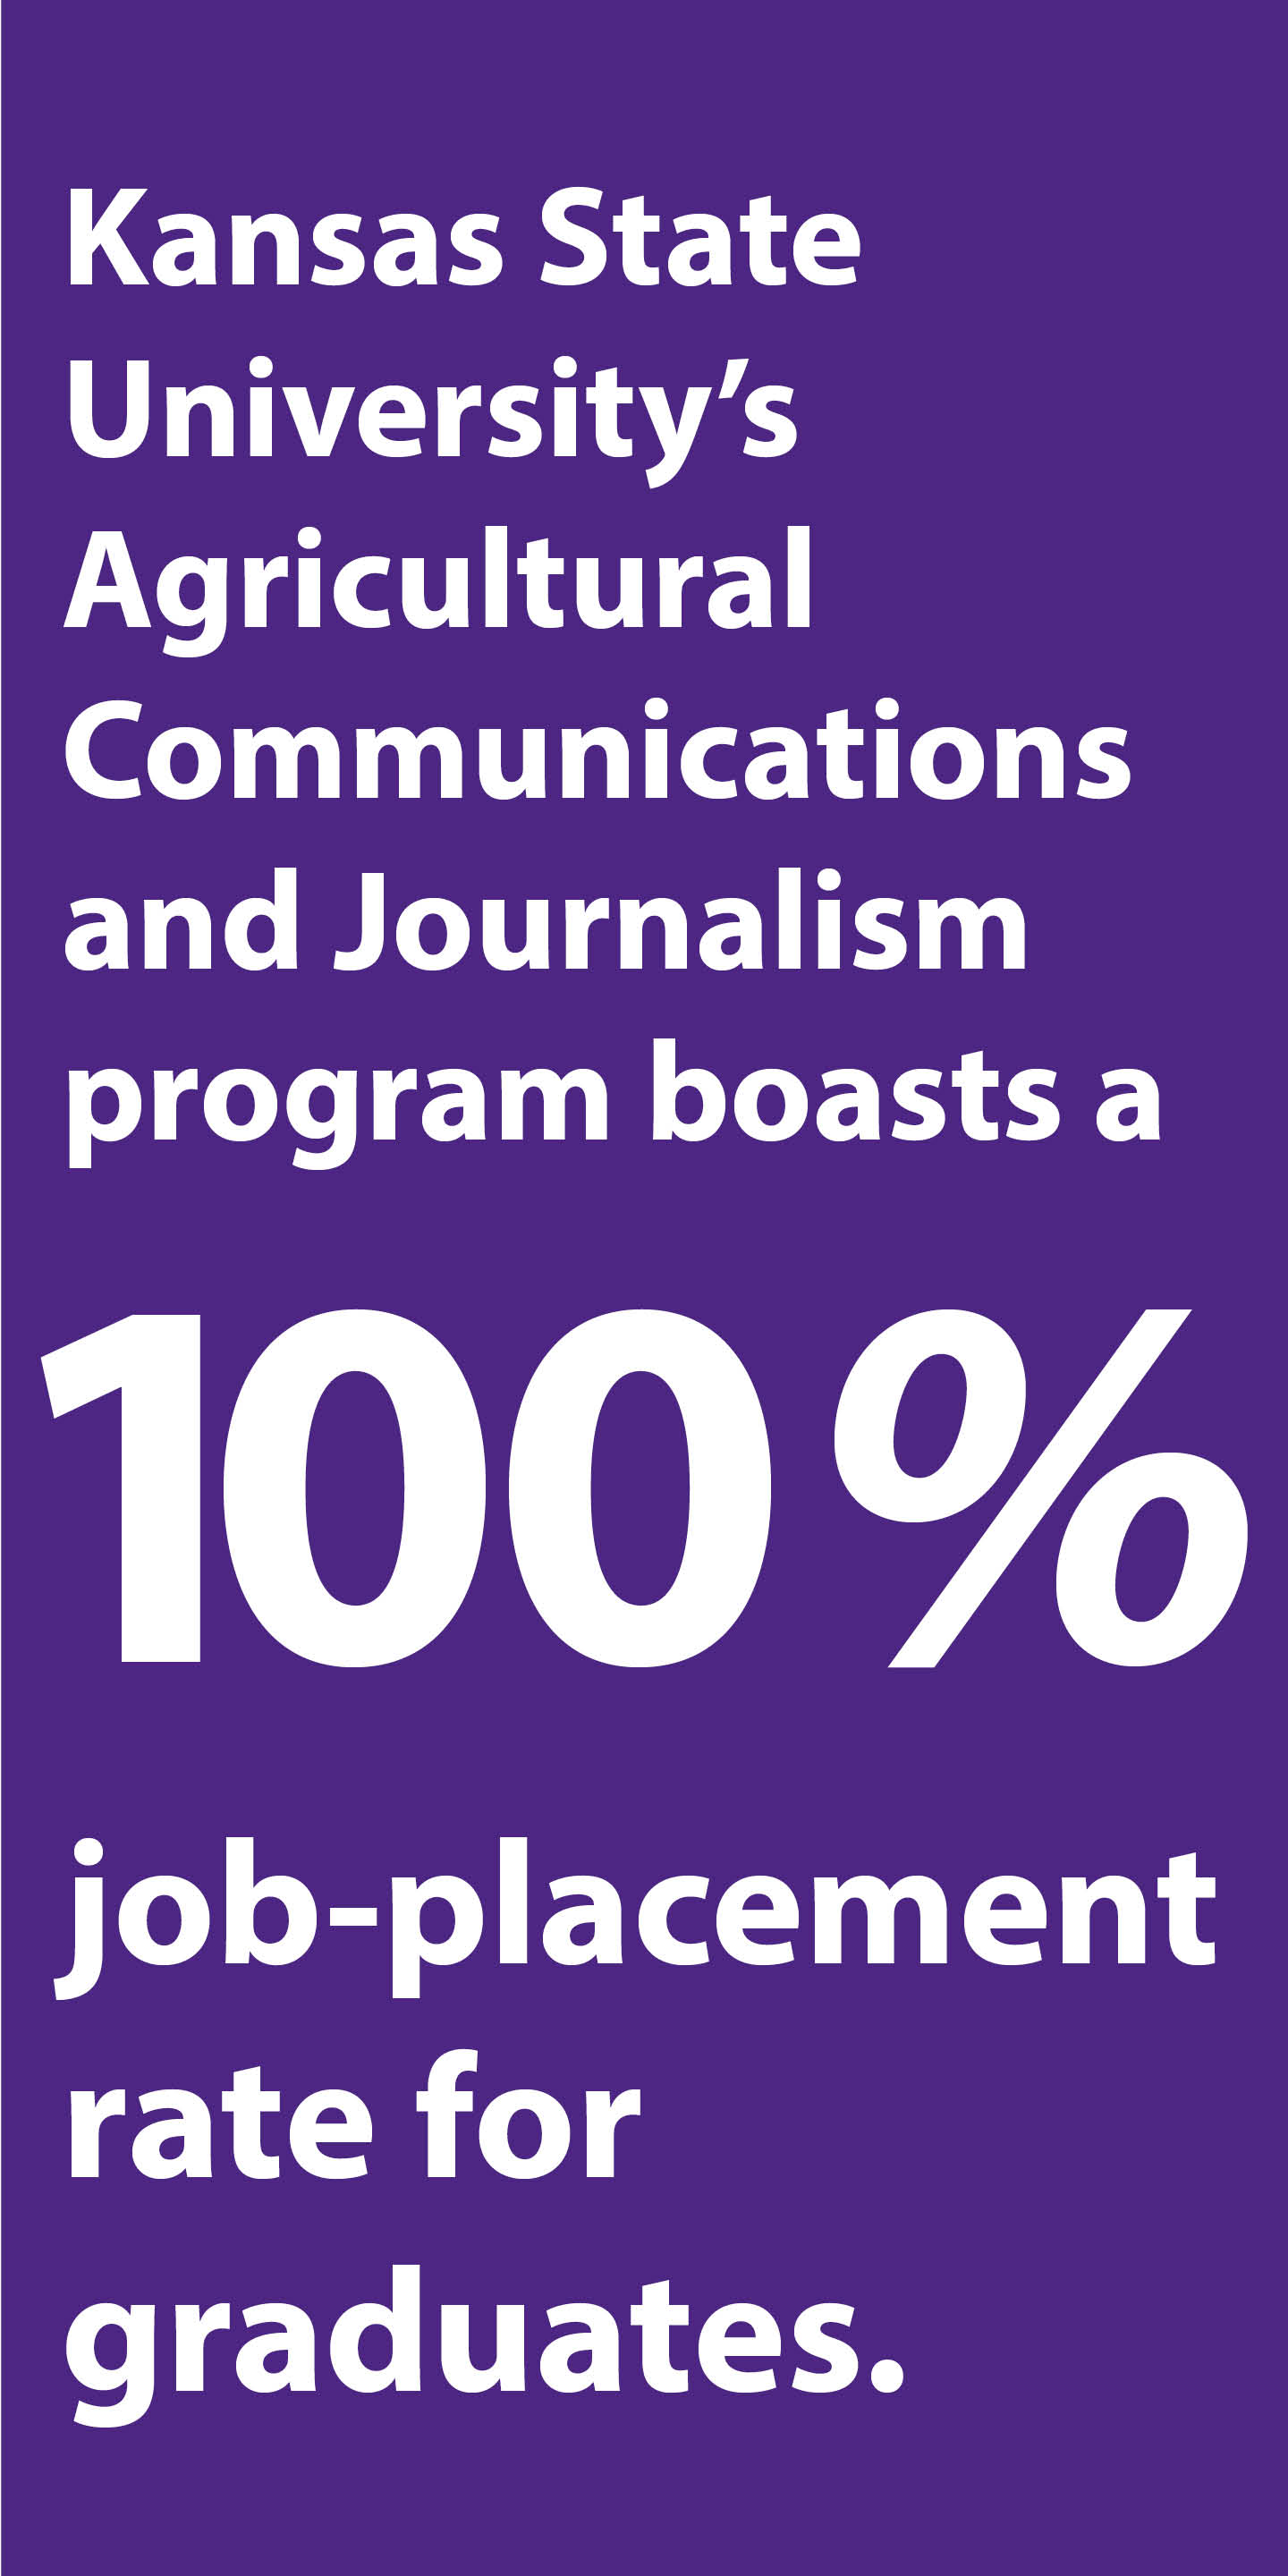 Kansas State's Agricultural Communications and Journalism Program boasts a 100% job-placement rate for graduates.